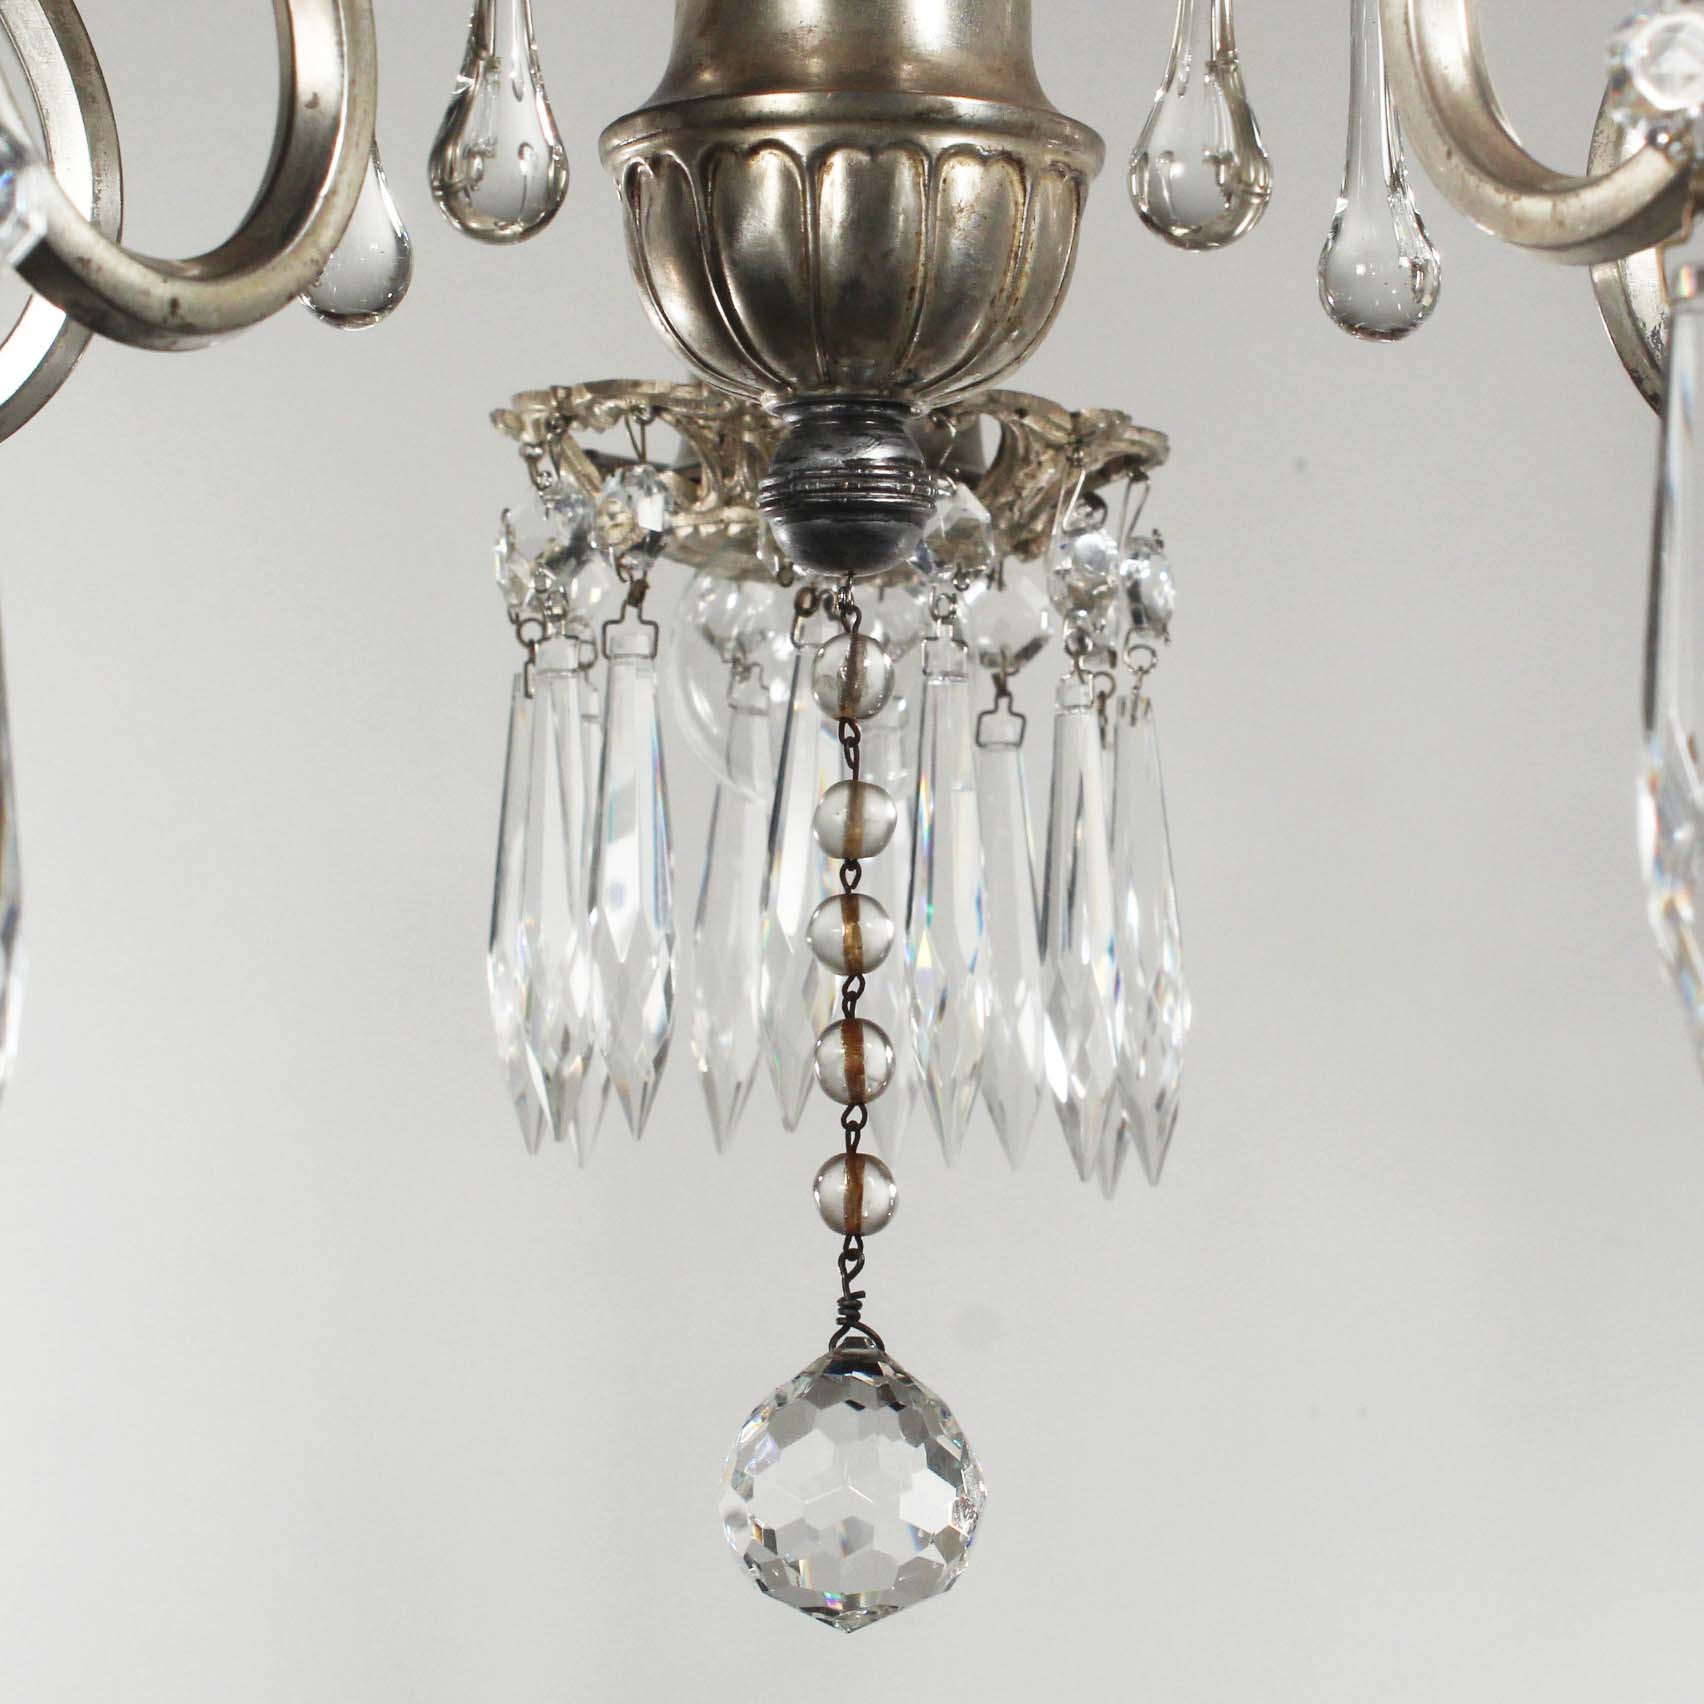 SOLD Antique Neoclassical Five-Light Semi-Flush Chandelier with Prisms, Silver Plate-67428